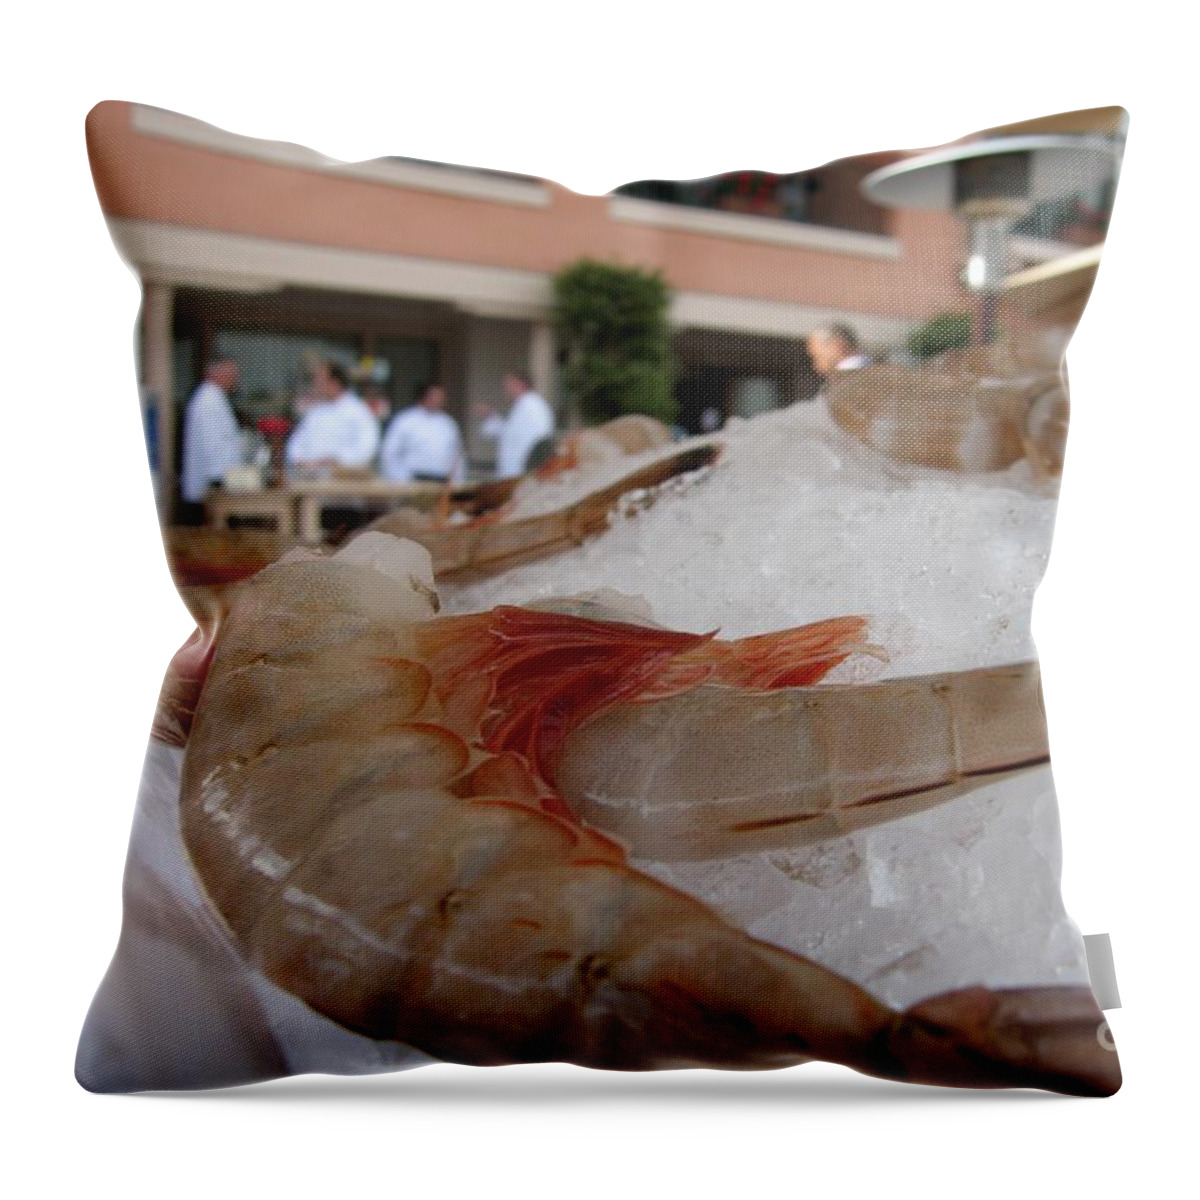 Shrimp Throw Pillow featuring the photograph Shrimp On Ice by James B Toy